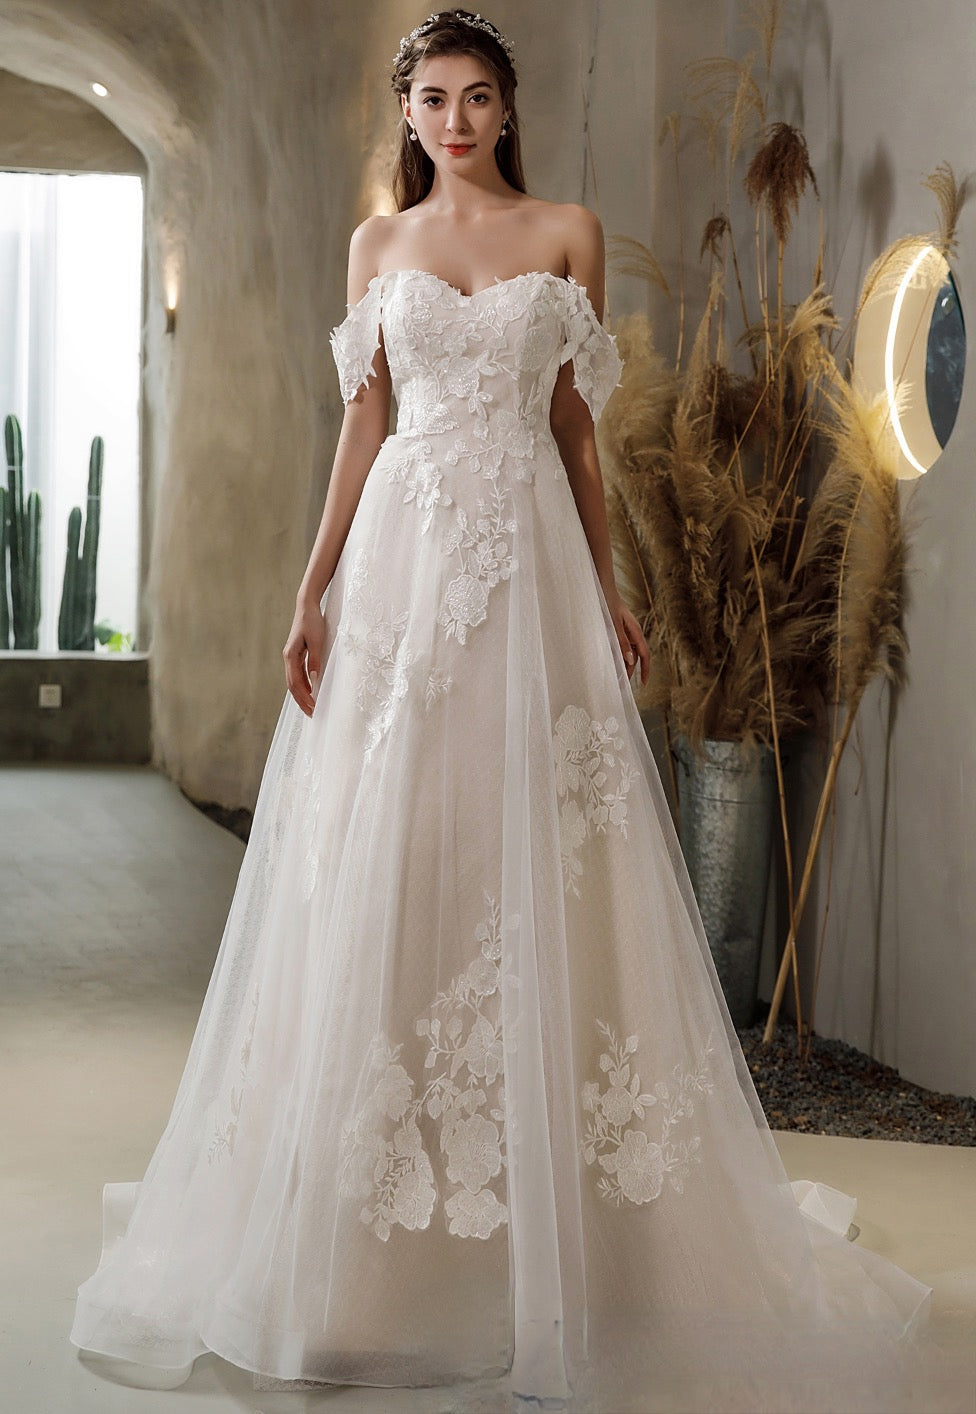 Floral Lace Wedding Dress With Detachable Off-The-Shoulder Straps –  TulleLux Bridal Crowns & Accessories